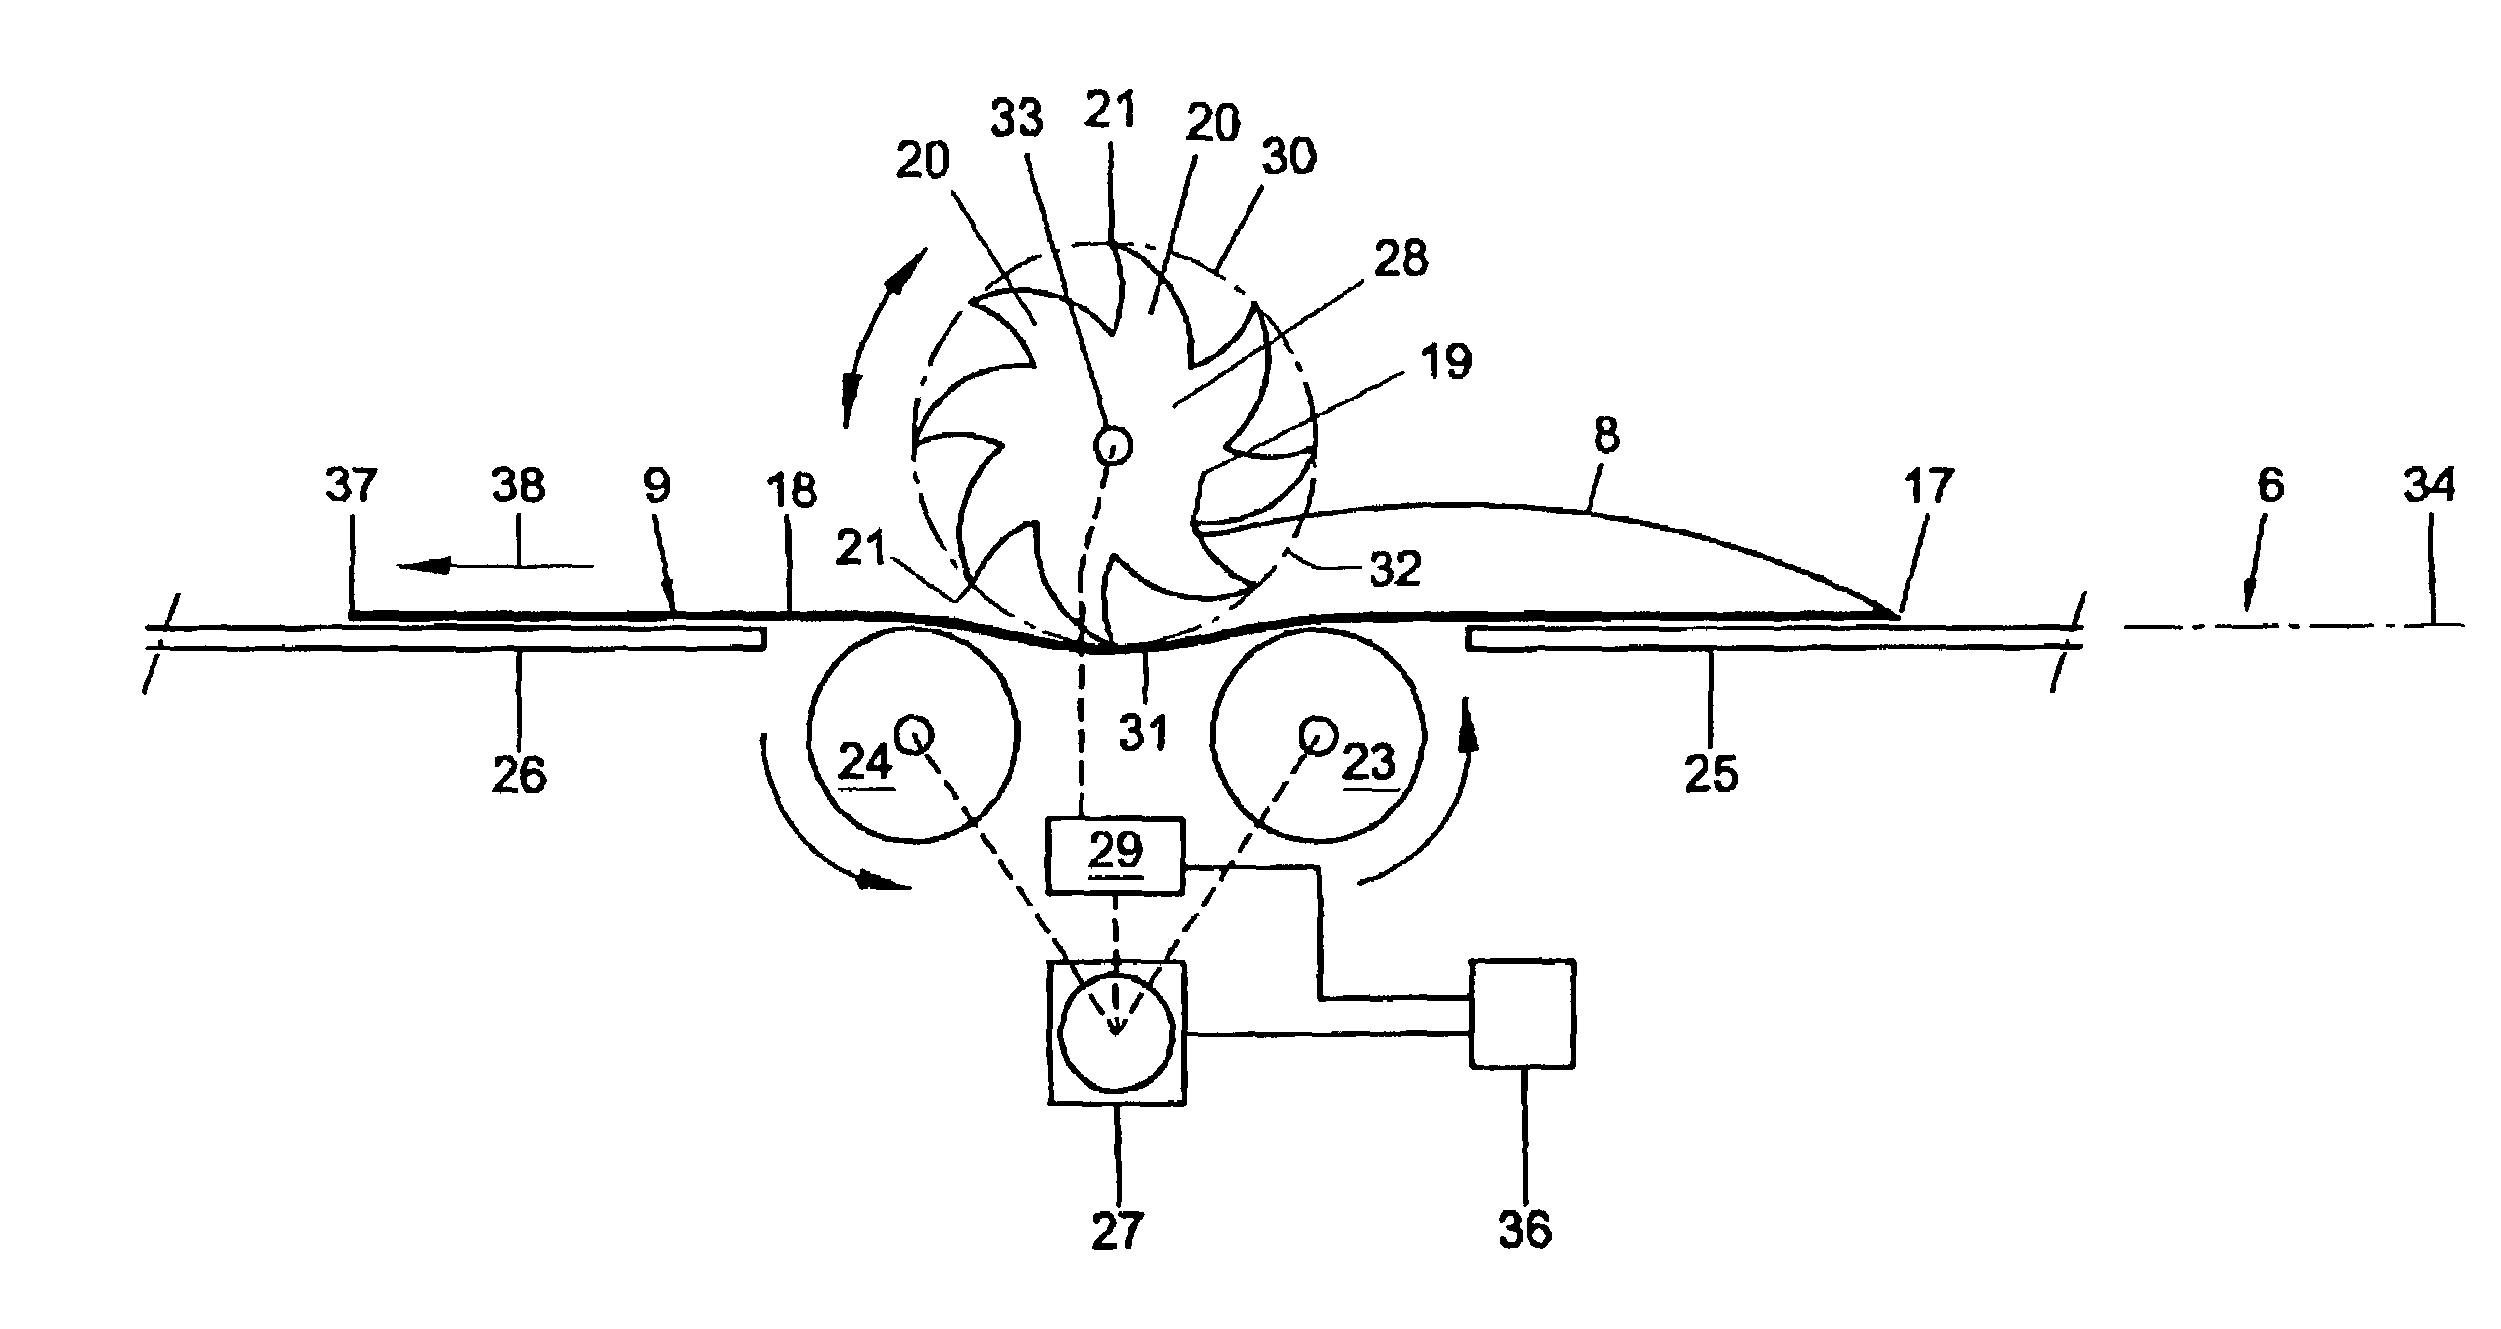 Machine and method for inserting sheets into envelopes